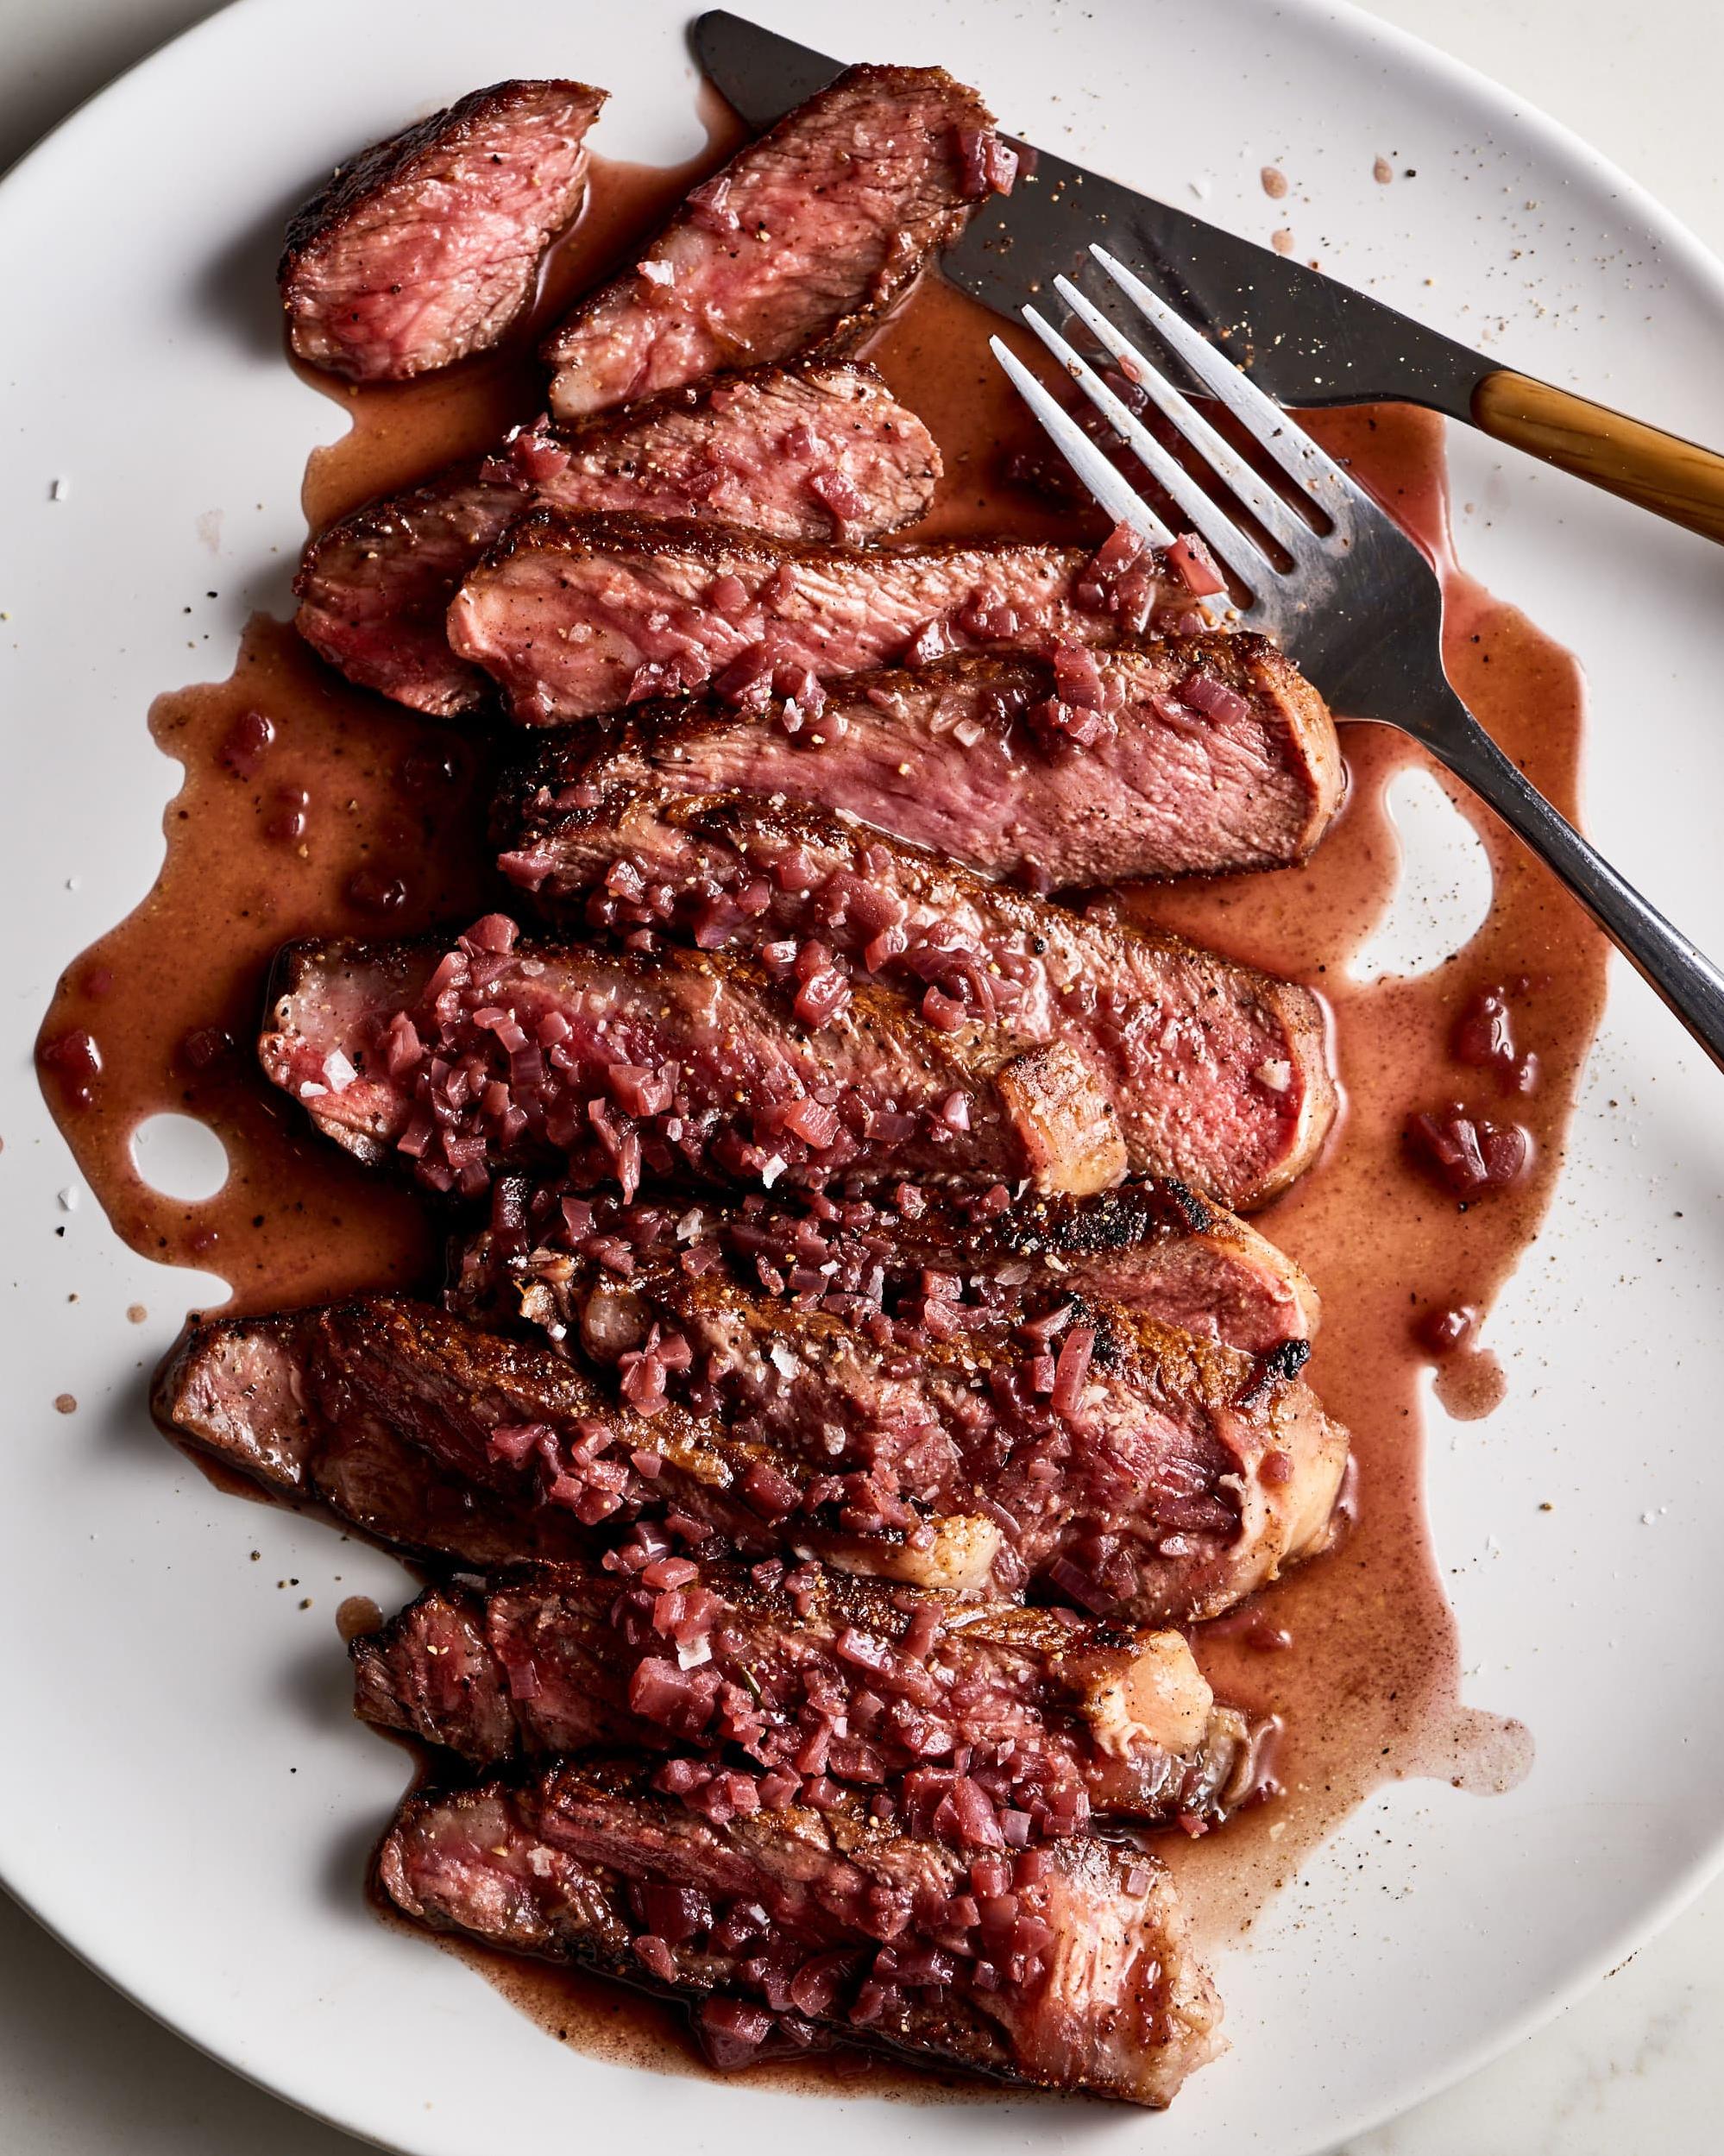  The combination of the spices, the tenderness of the steak, and the richness of the red wine sauce make this dish a must-try!